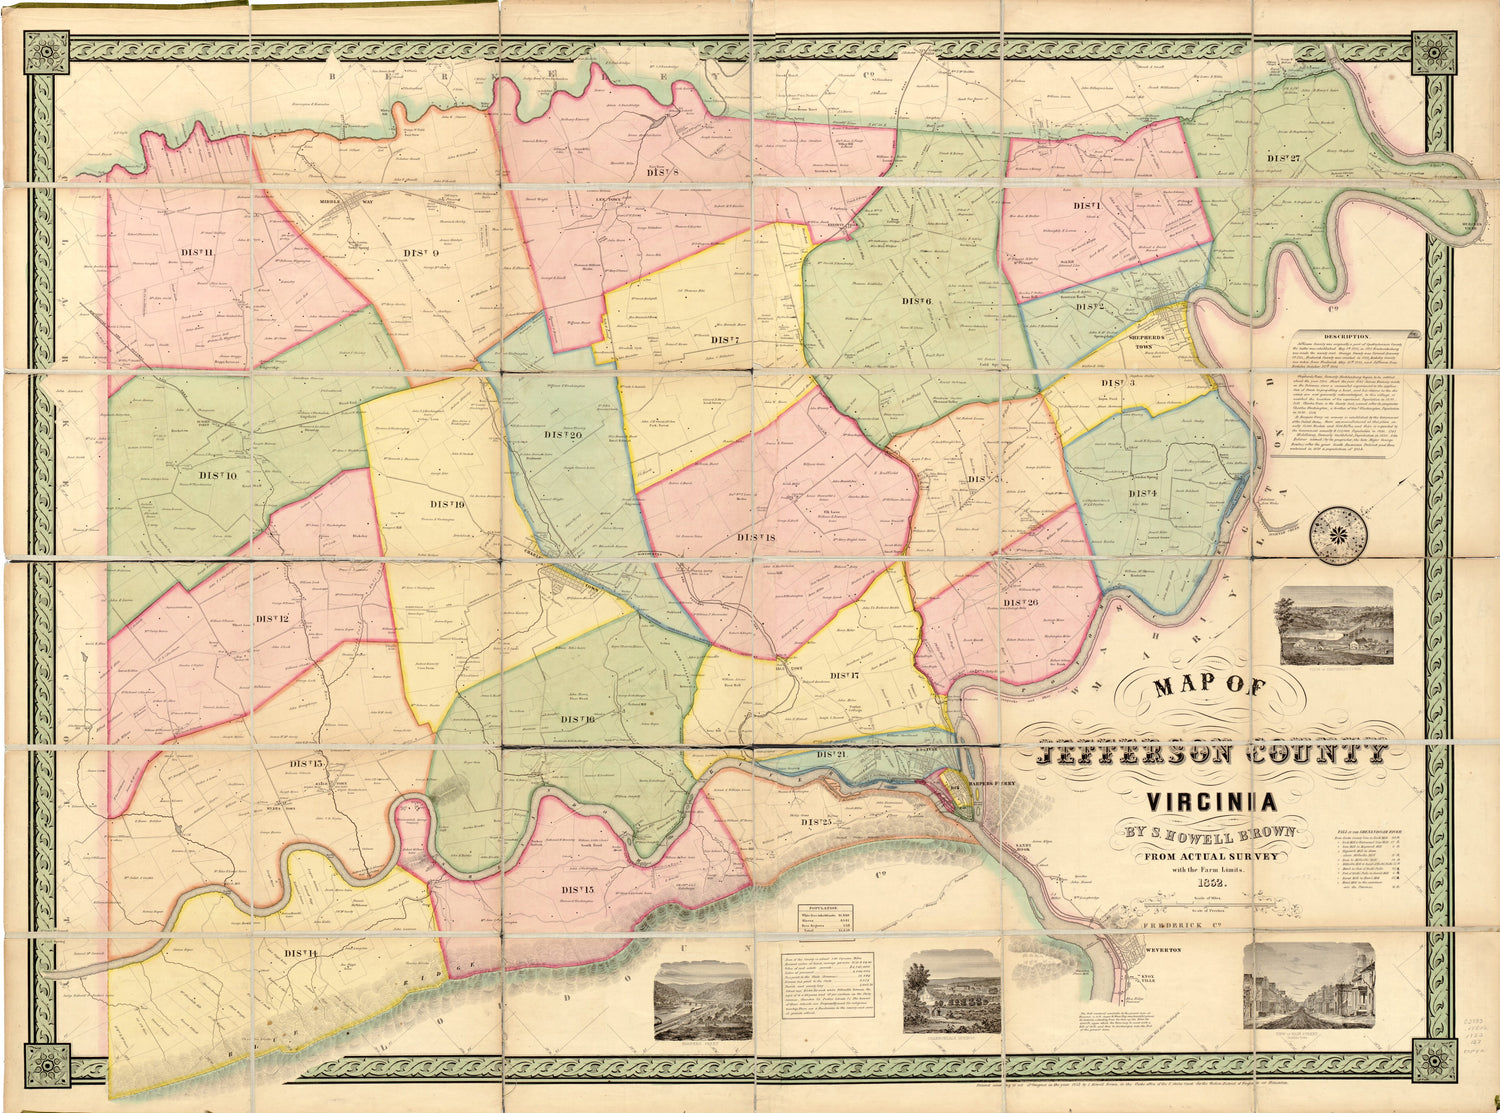 This old map of Map of Jefferson County, Virginia from 1852 was created by S. Howell Brown in 1852